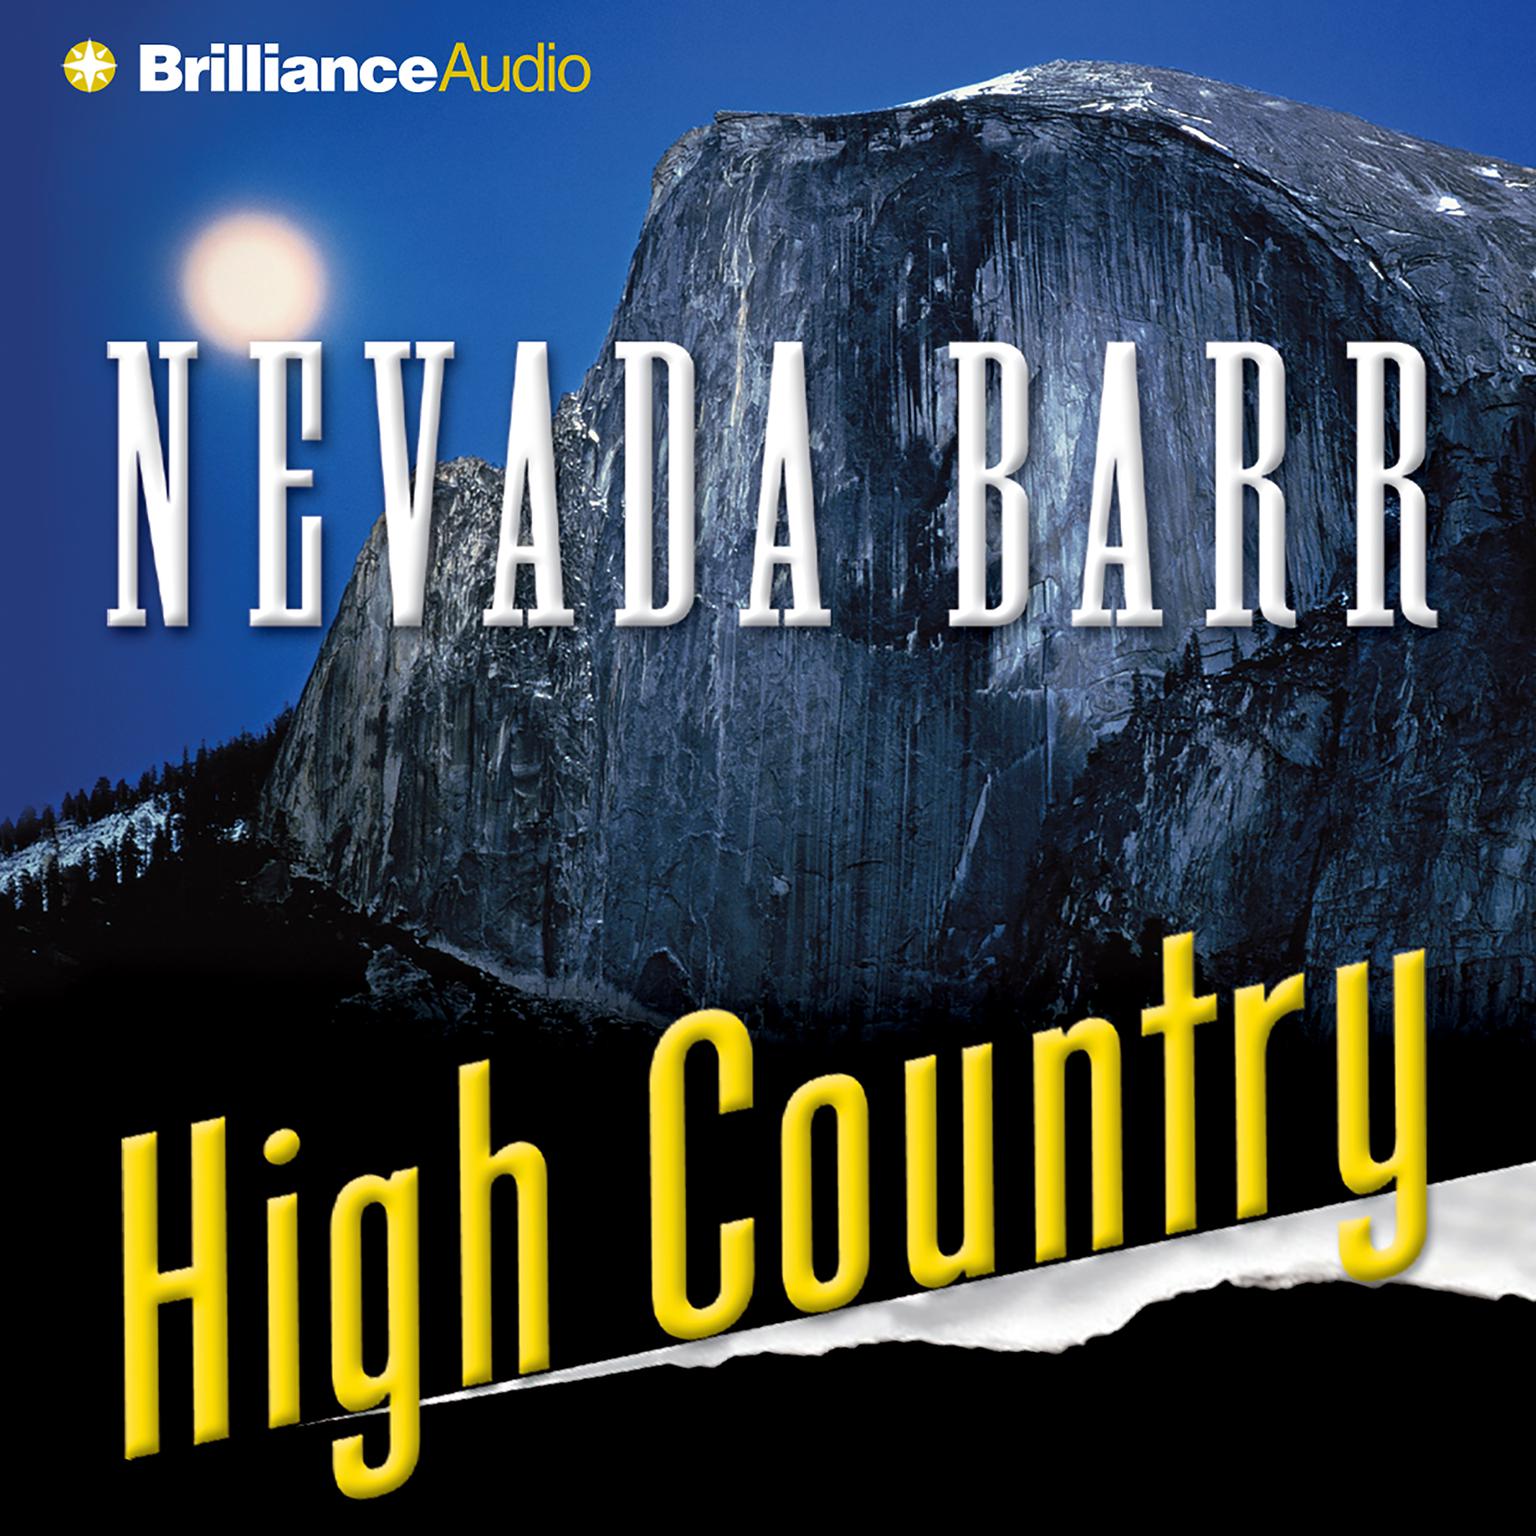 High Country (Abridged) Audiobook, by Nevada Barr